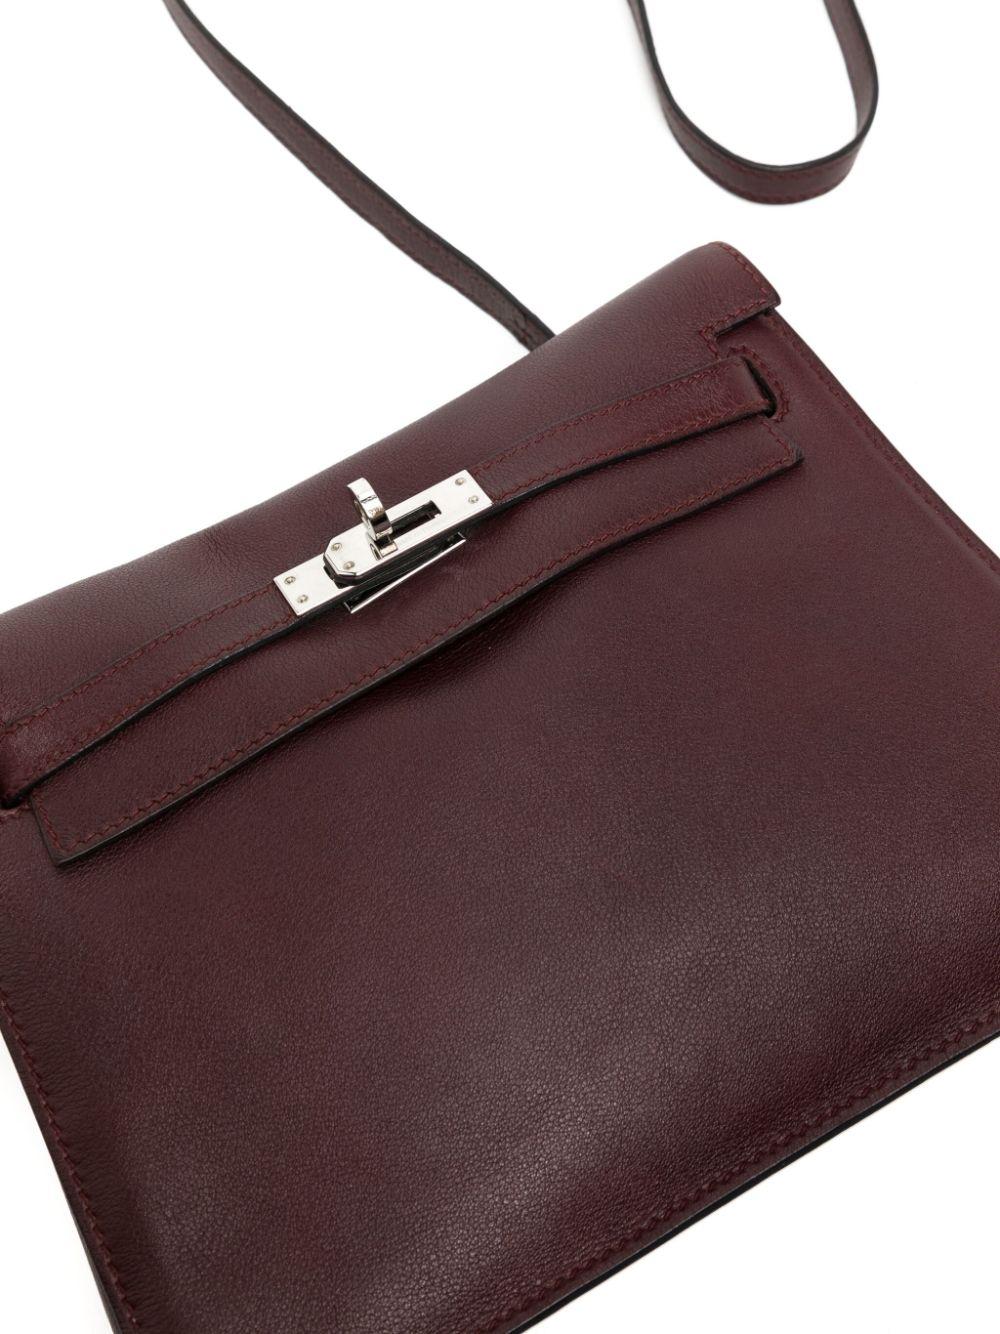 Jean-Paul Gaultier designed the Hermès Kelly Danse 2008, an iteration of the Maison's classic, taking a practical belt bag form. This specific example from 2010 is crafted from Evercolour leather in deep burgundy, complemented by polished